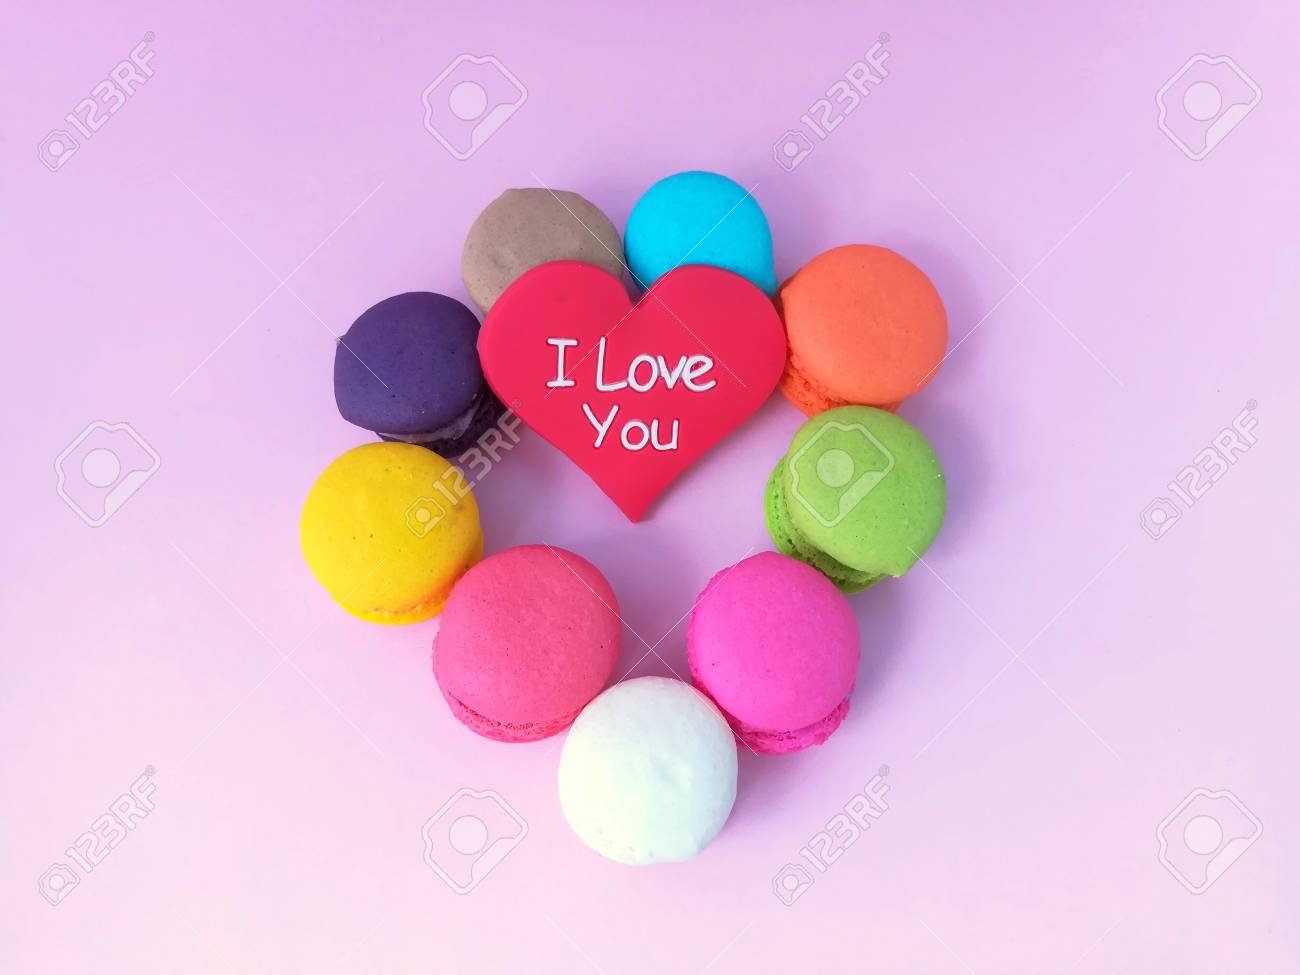 Delicious Macaroon And Red Heart Arrange Cute Shape Placed